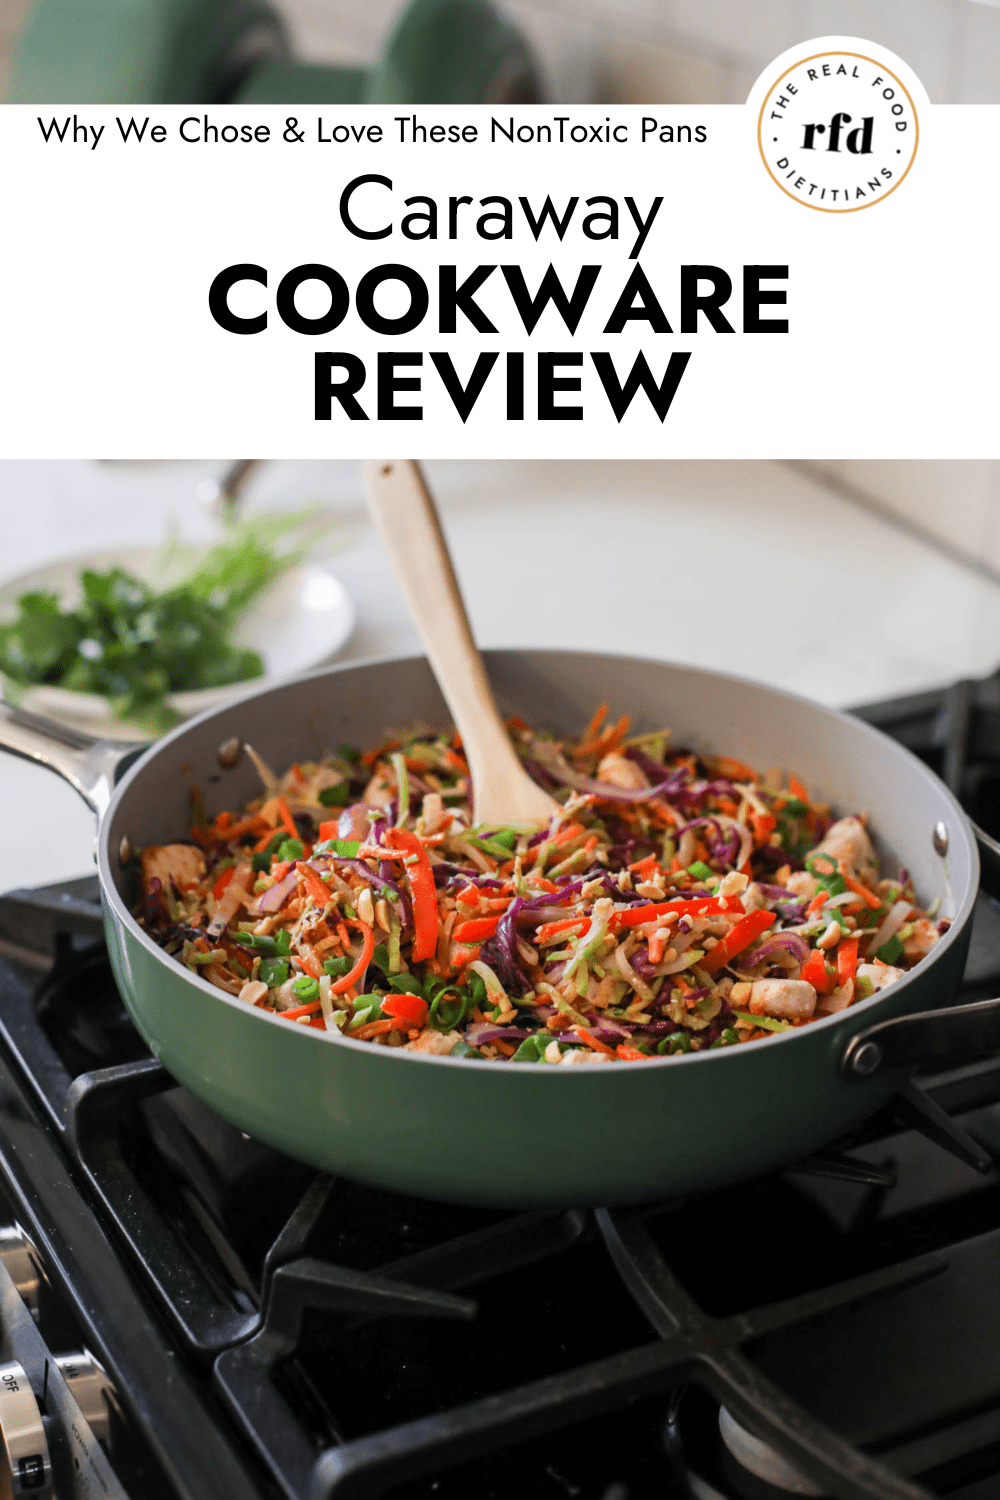 Honest Caraway Cookware Review After Years of Daily Use - Recipes